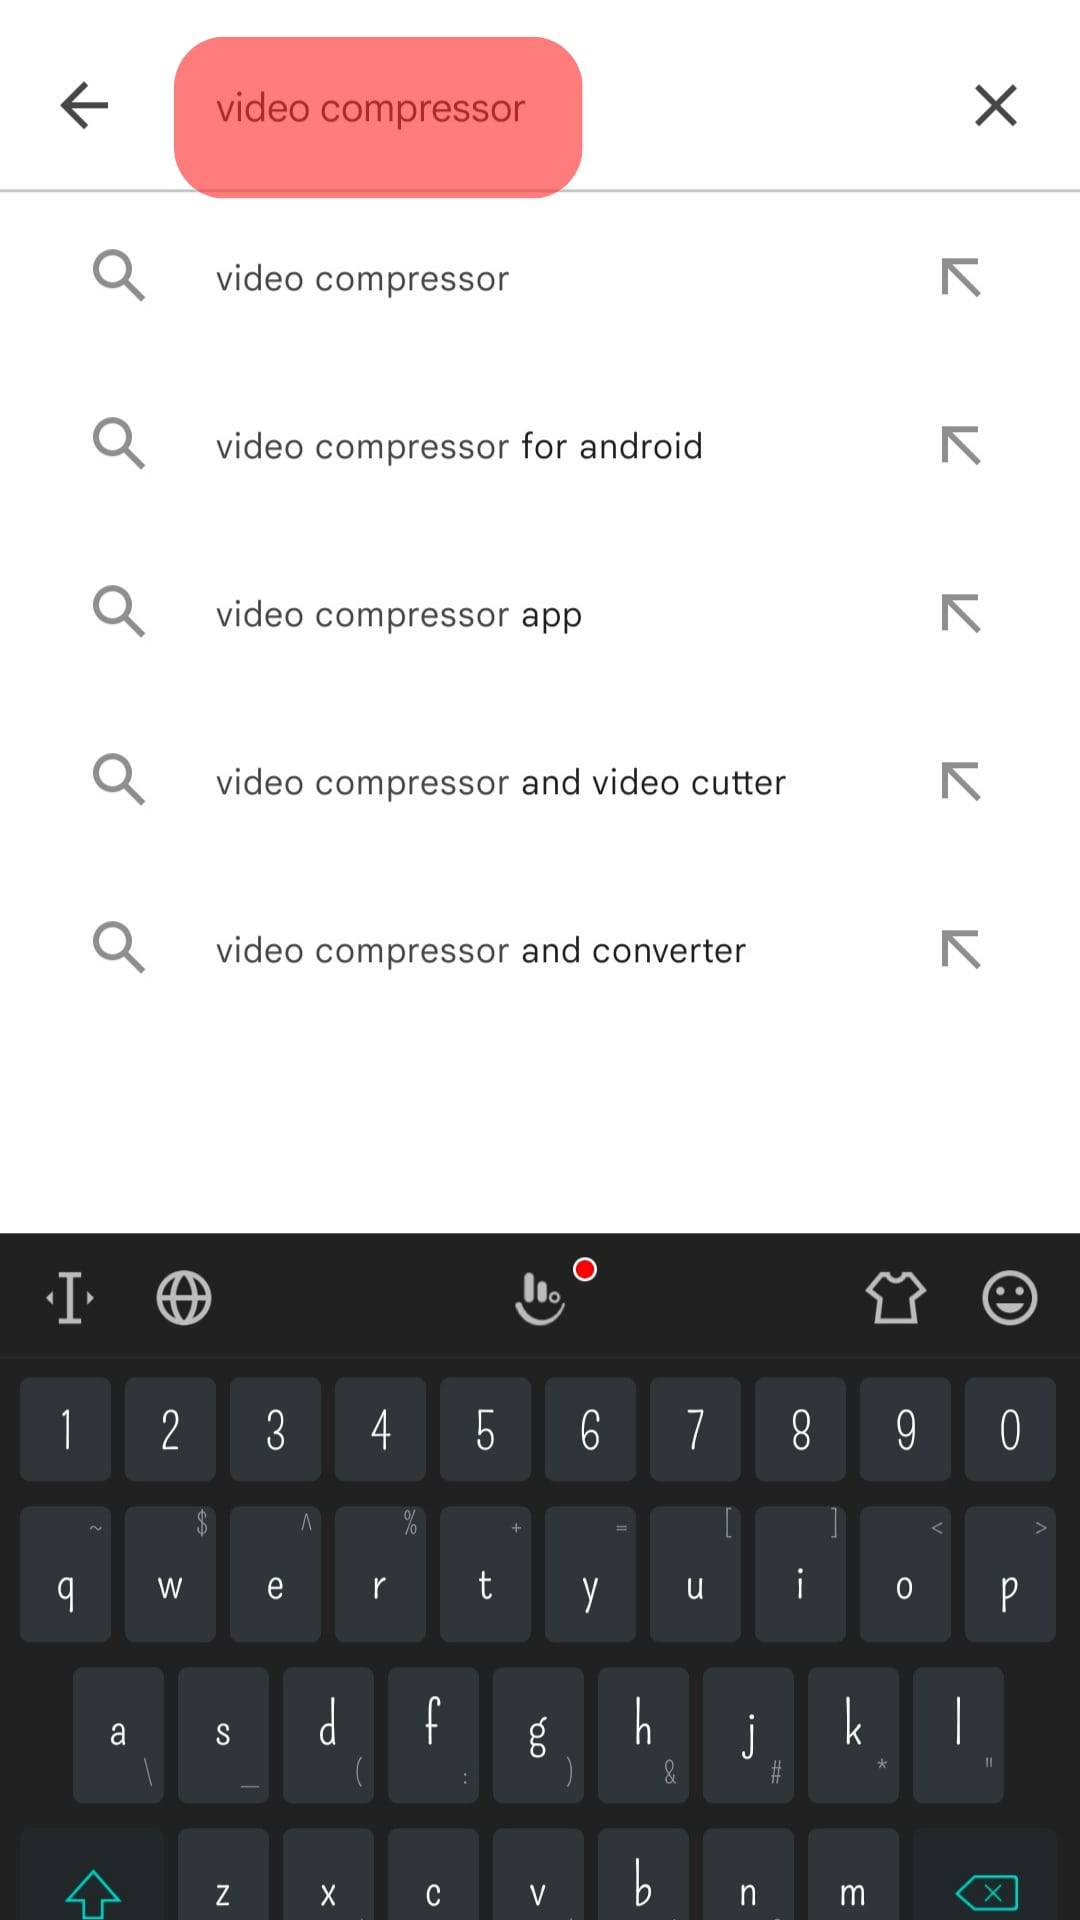 Type Video Compressor Into The Search Bar.